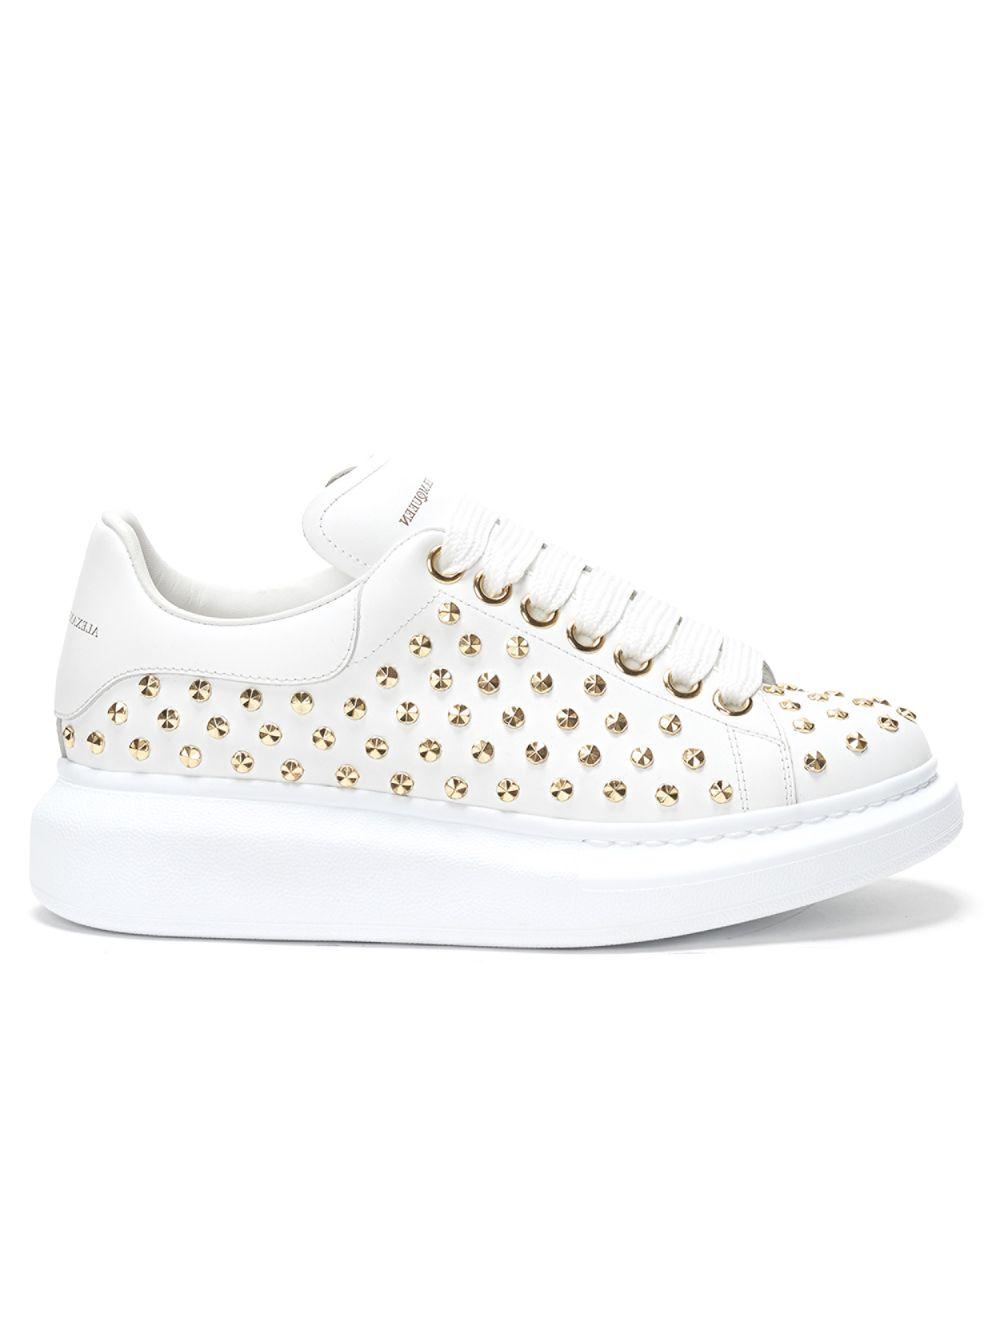 Alexander McQueen Spike-studded Leather Platform Sneakers in White | Lyst